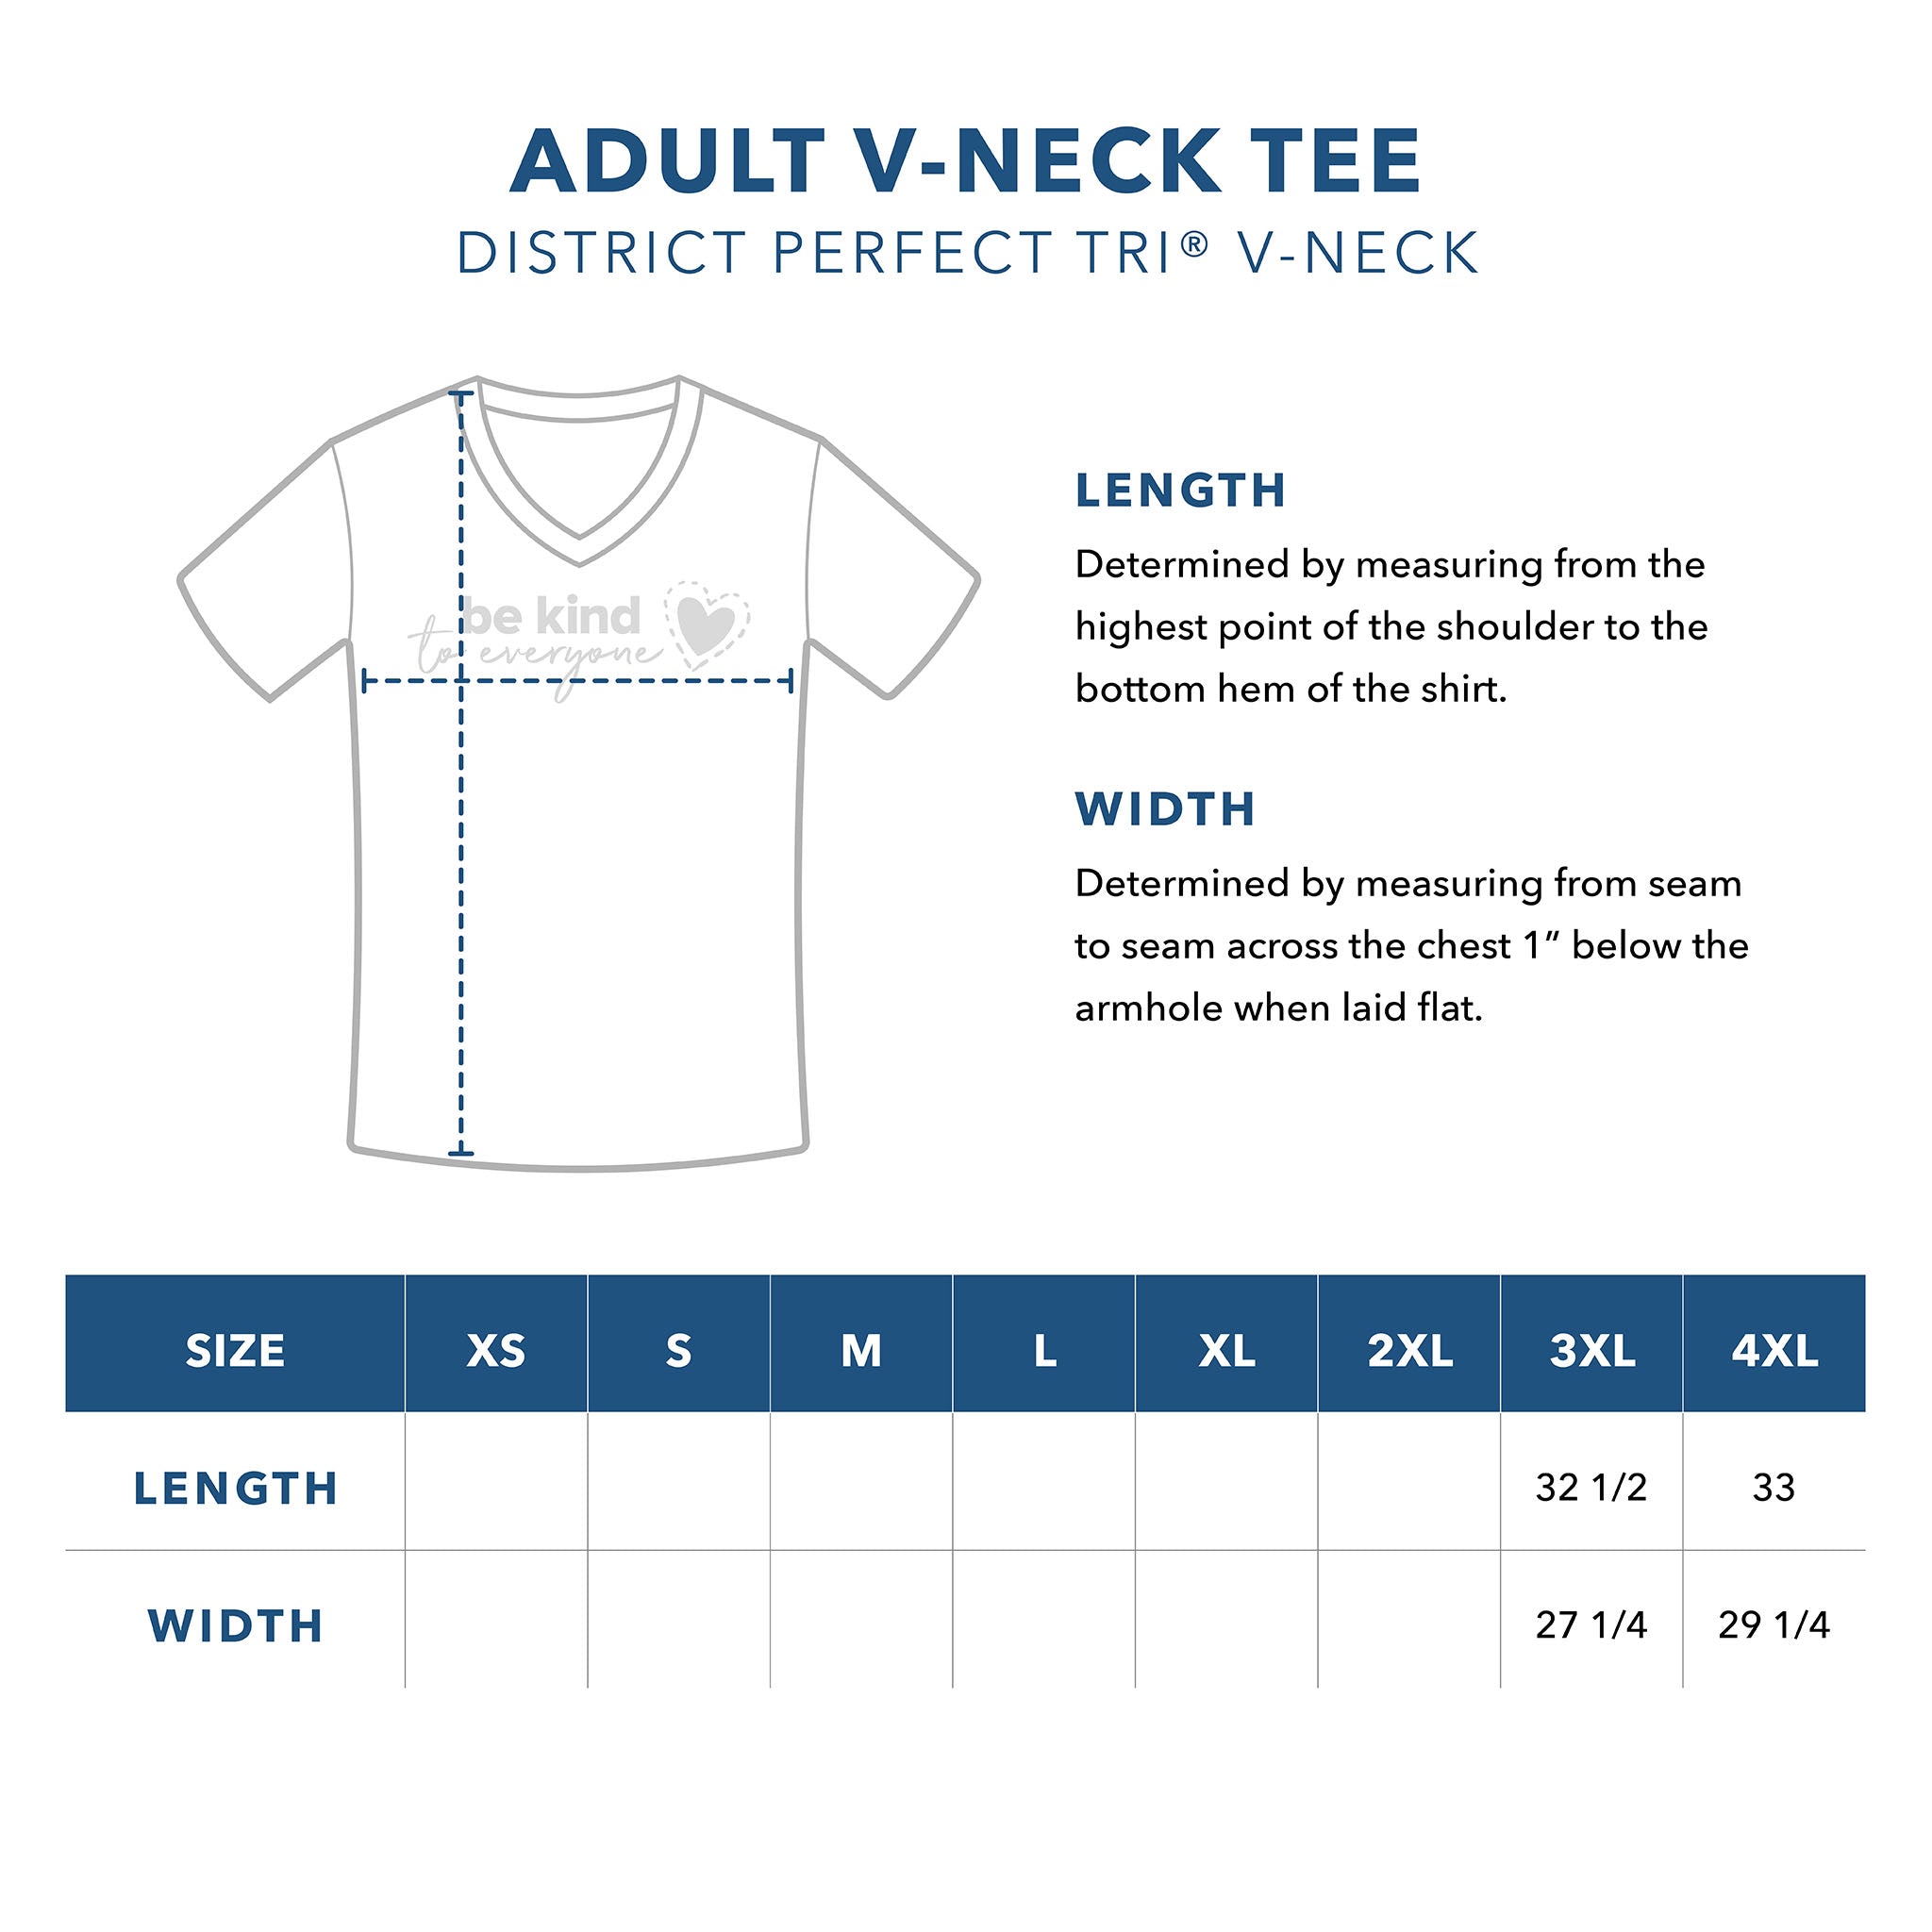 District Perfect Tri V-Neck Sizing Guide